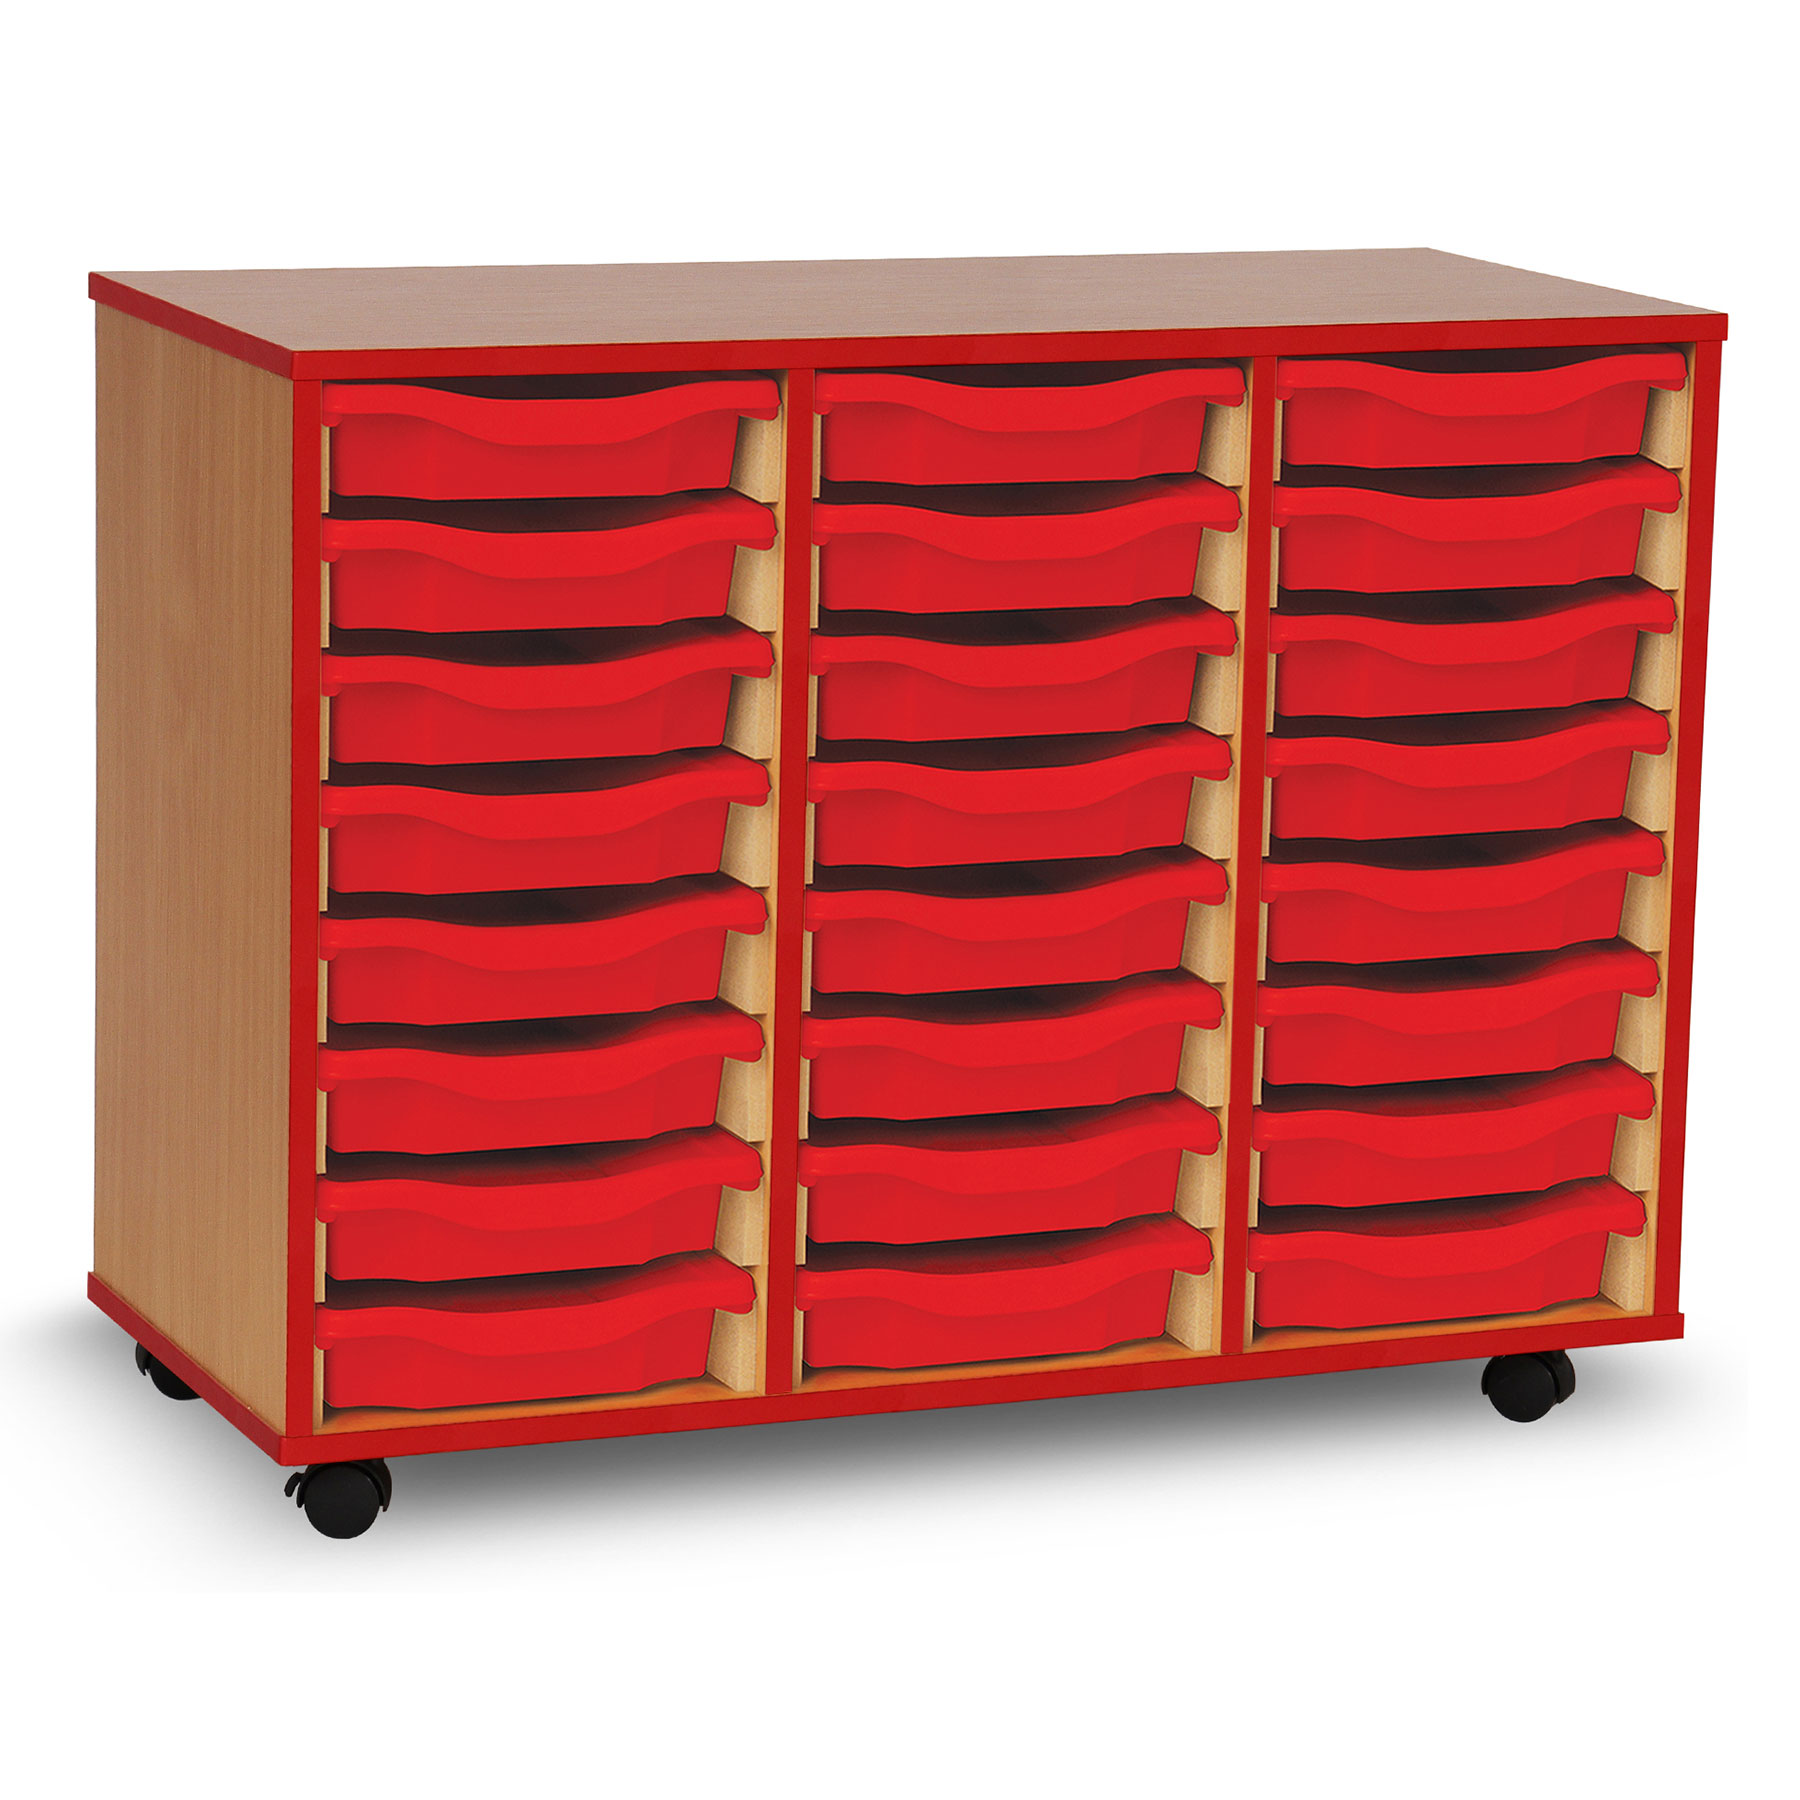 24 Single Tray Unit with Red Edging, Castors & Red Trays